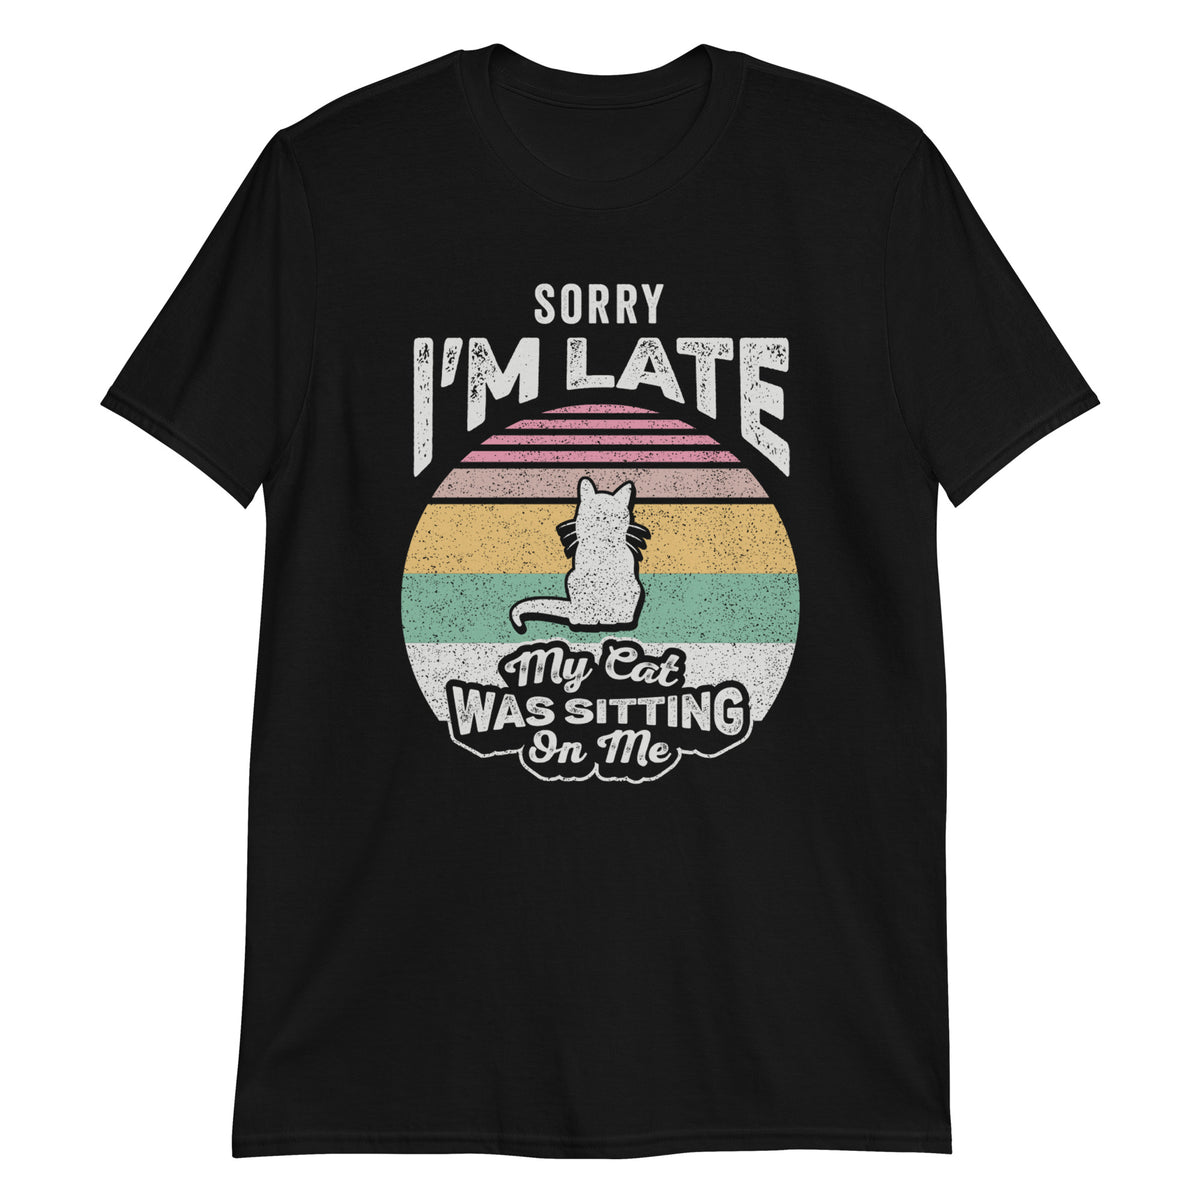 Sorry I'm Late My Cat Was Sitting on Me T-Shirt